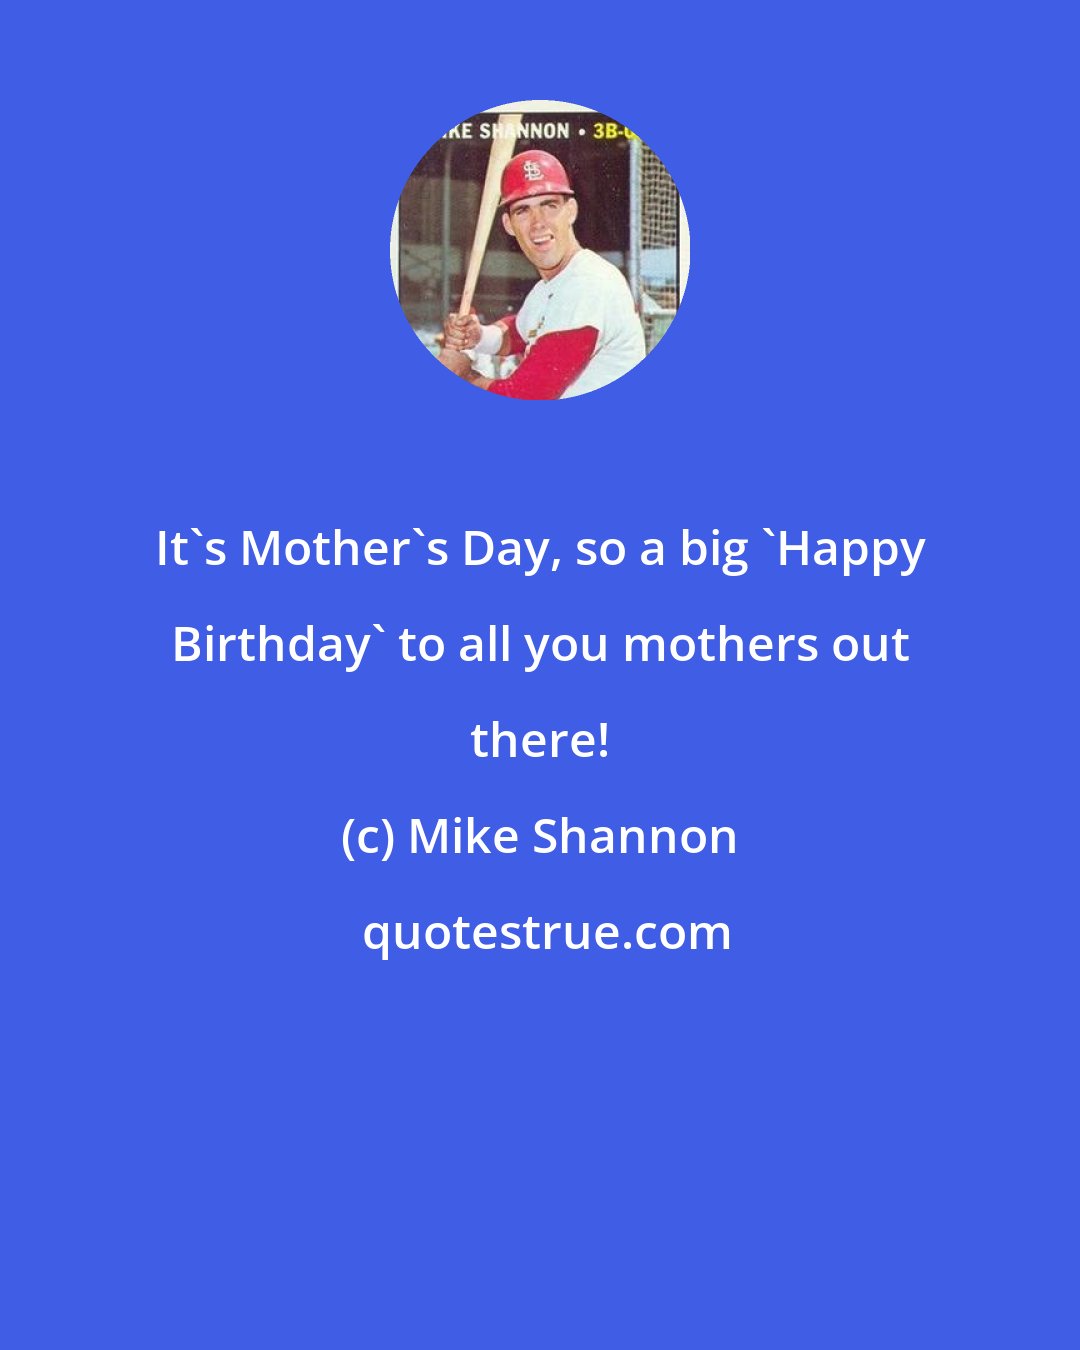 Mike Shannon: It's Mother's Day, so a big 'Happy Birthday' to all you mothers out there!